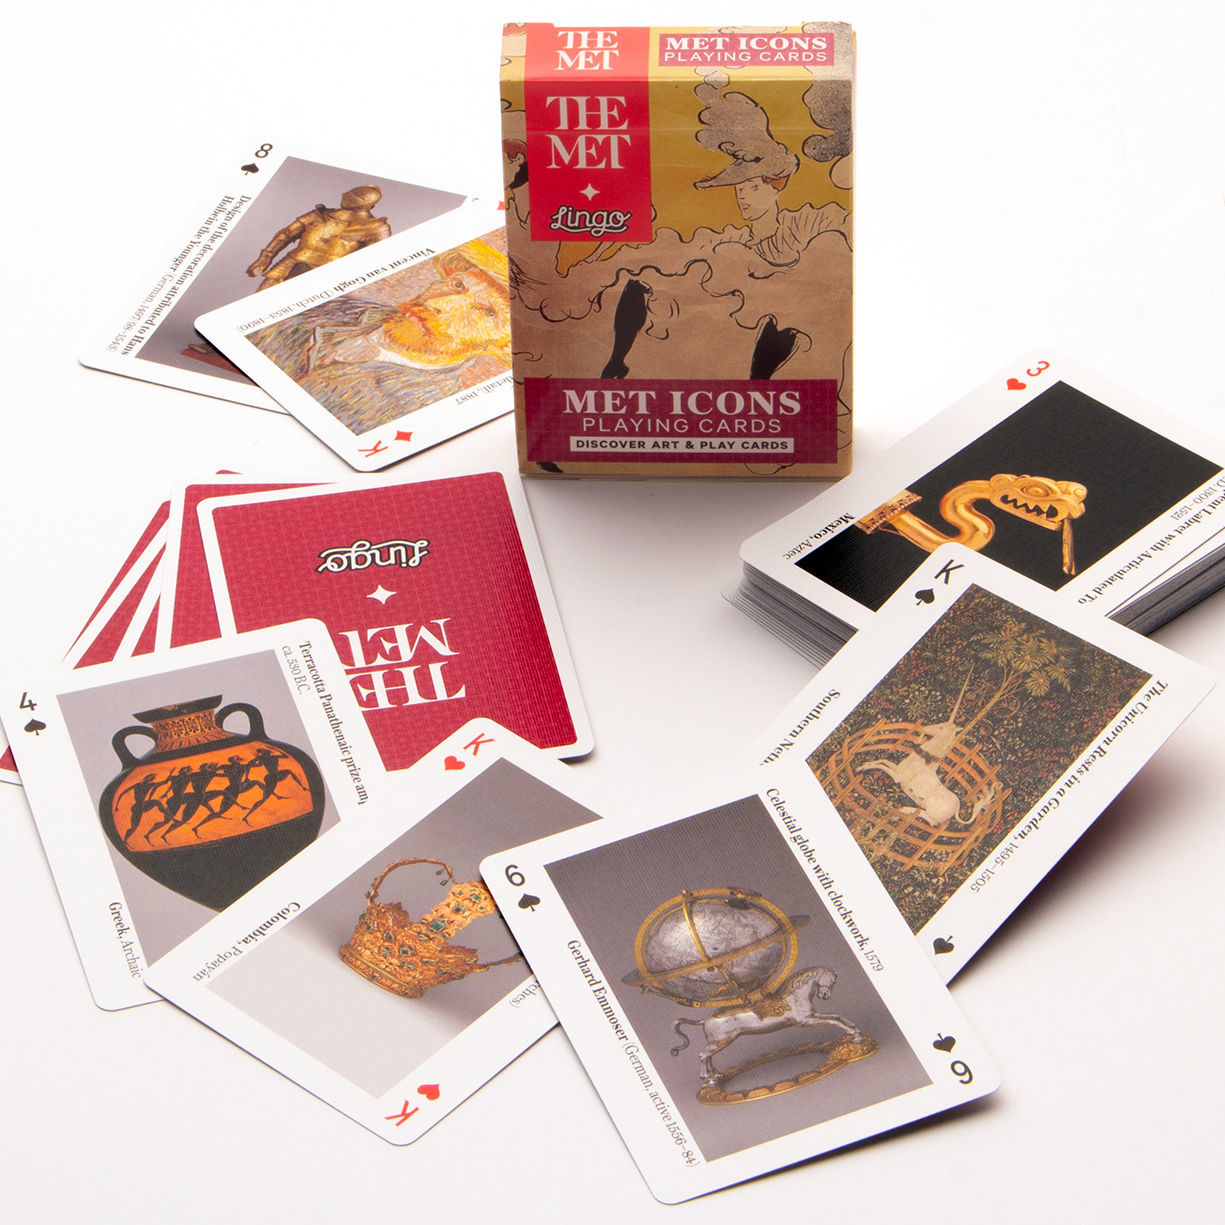 Metropolitan Museum Icons Premium Playing Cards made in USA featuring paintings, sculptures, and devices from their collection